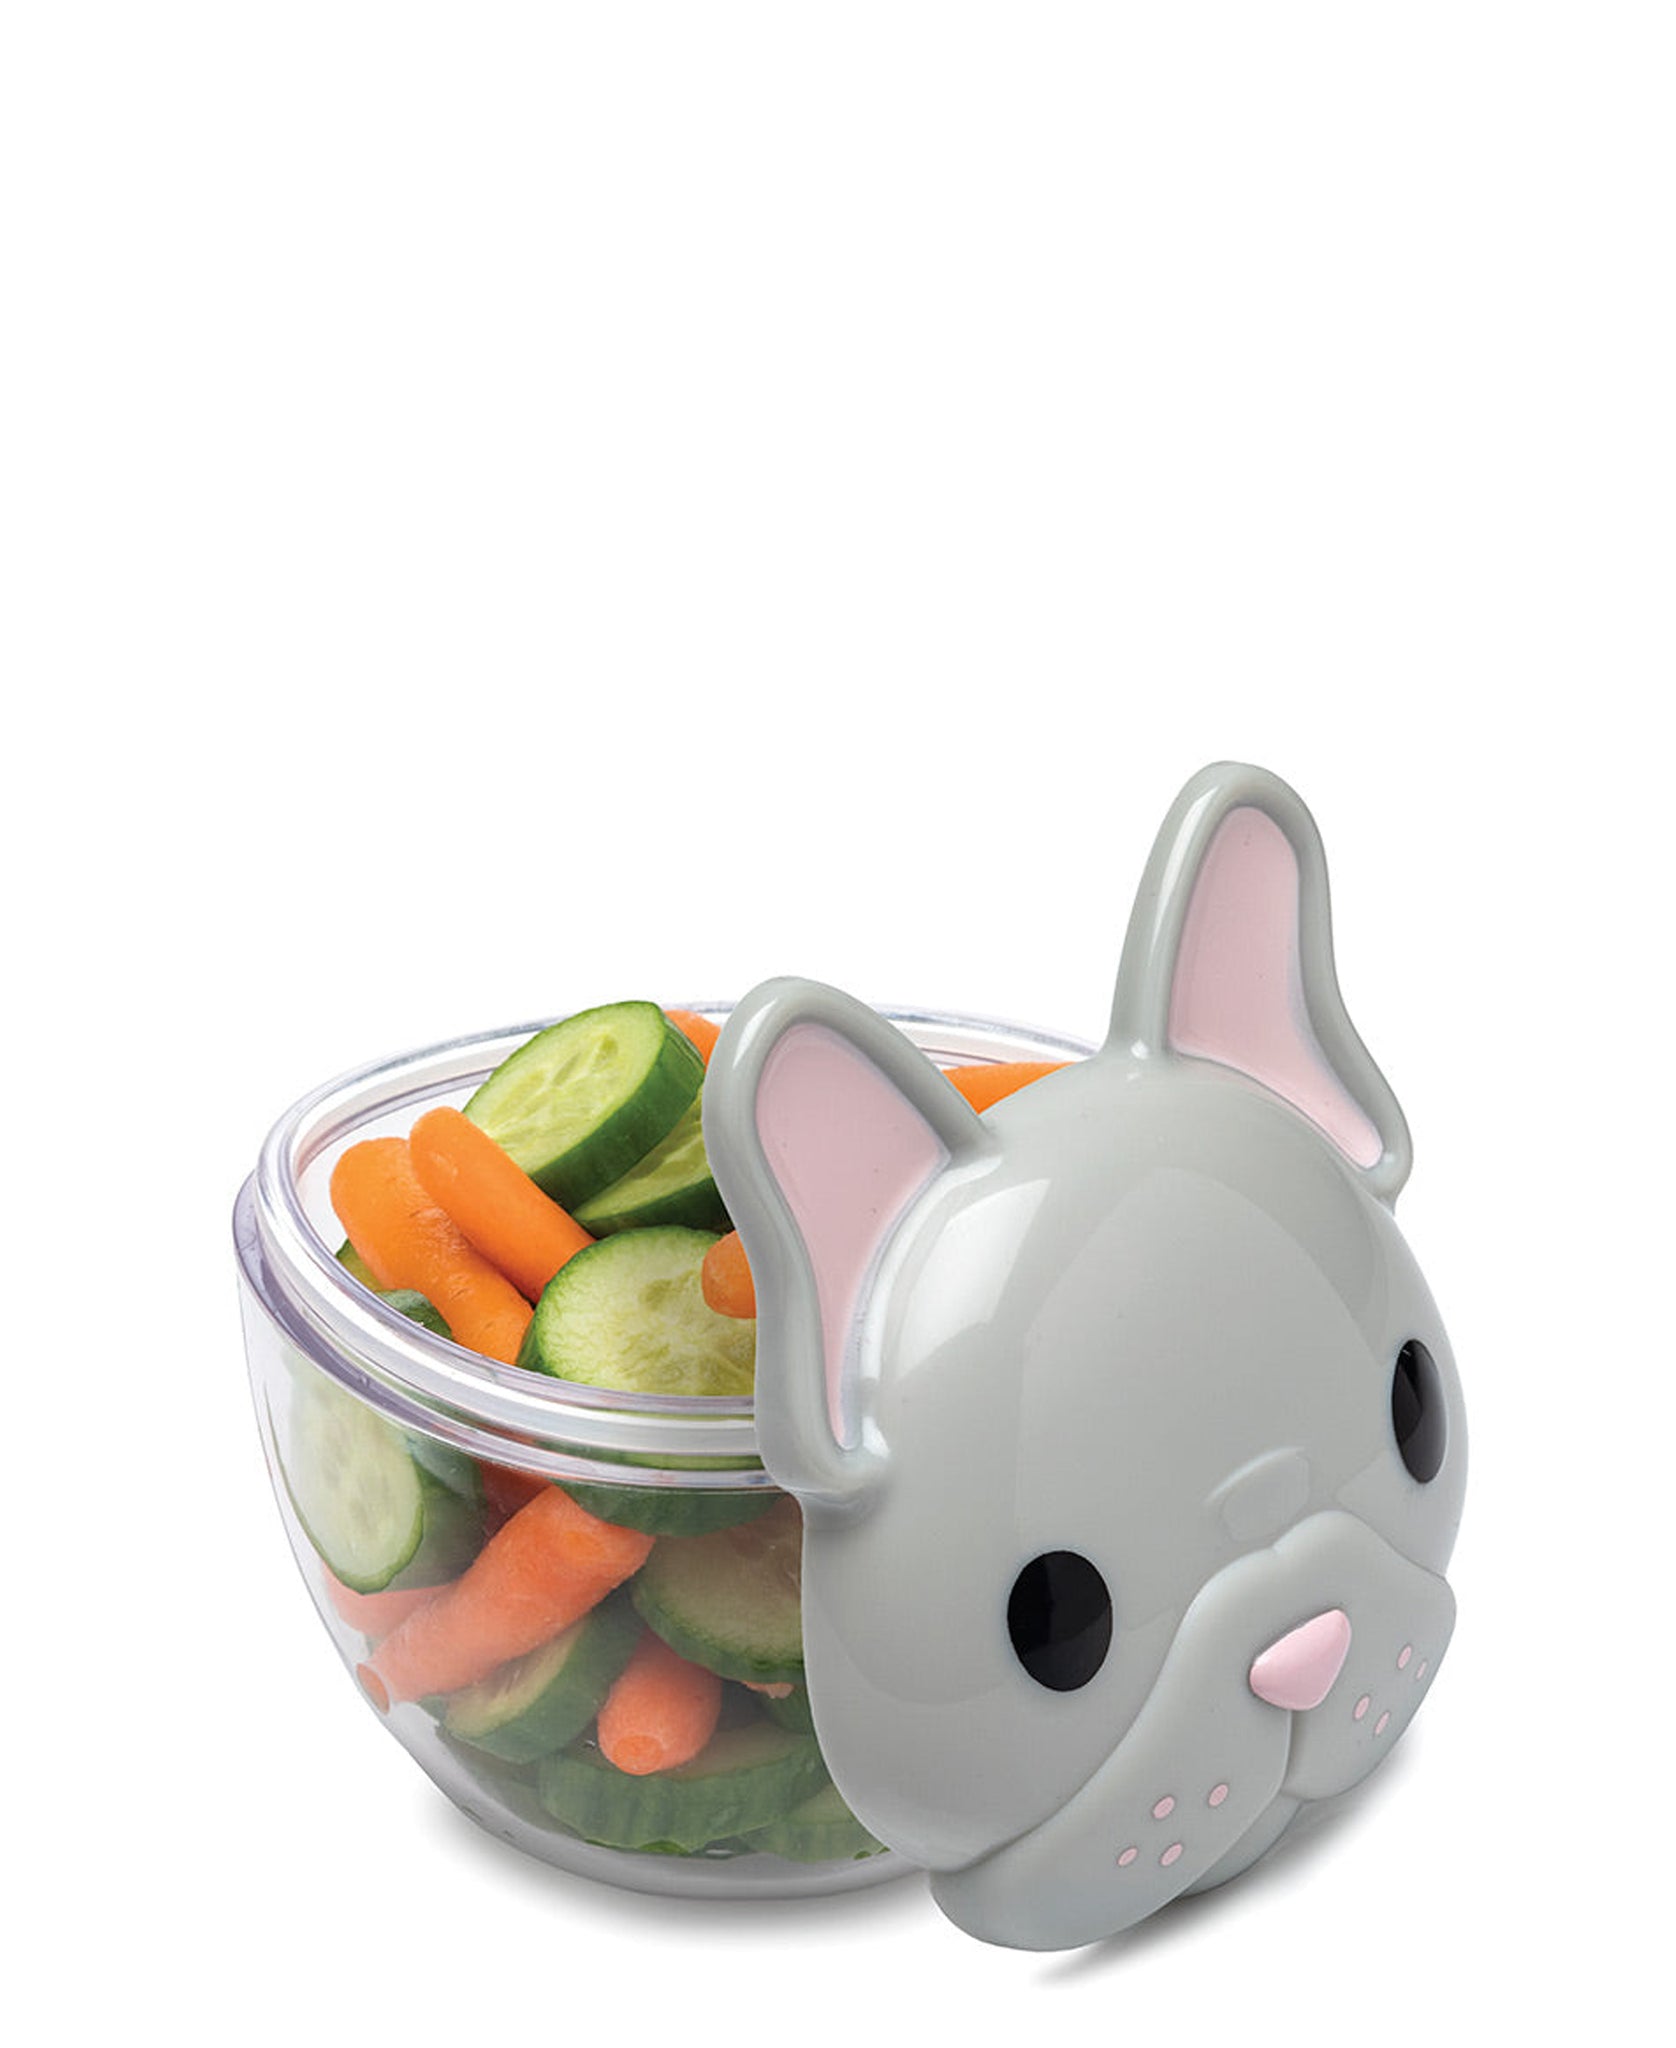 Melii Snack Container 232ml - Grey